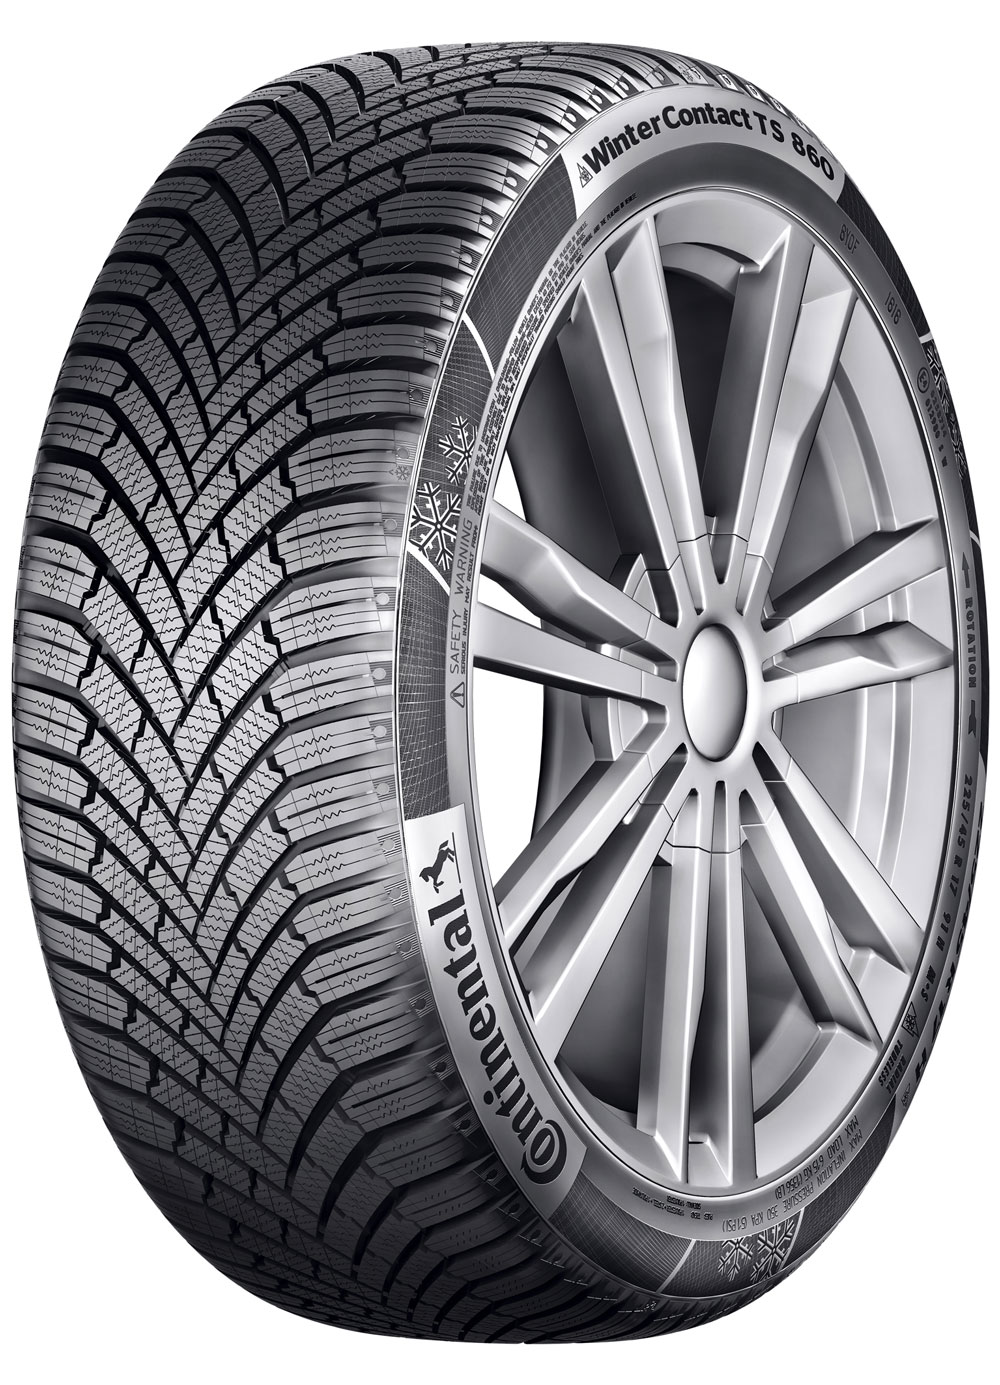 Anvelopa Iarna Continental Winter Contact Ts860 185/70R14 88T